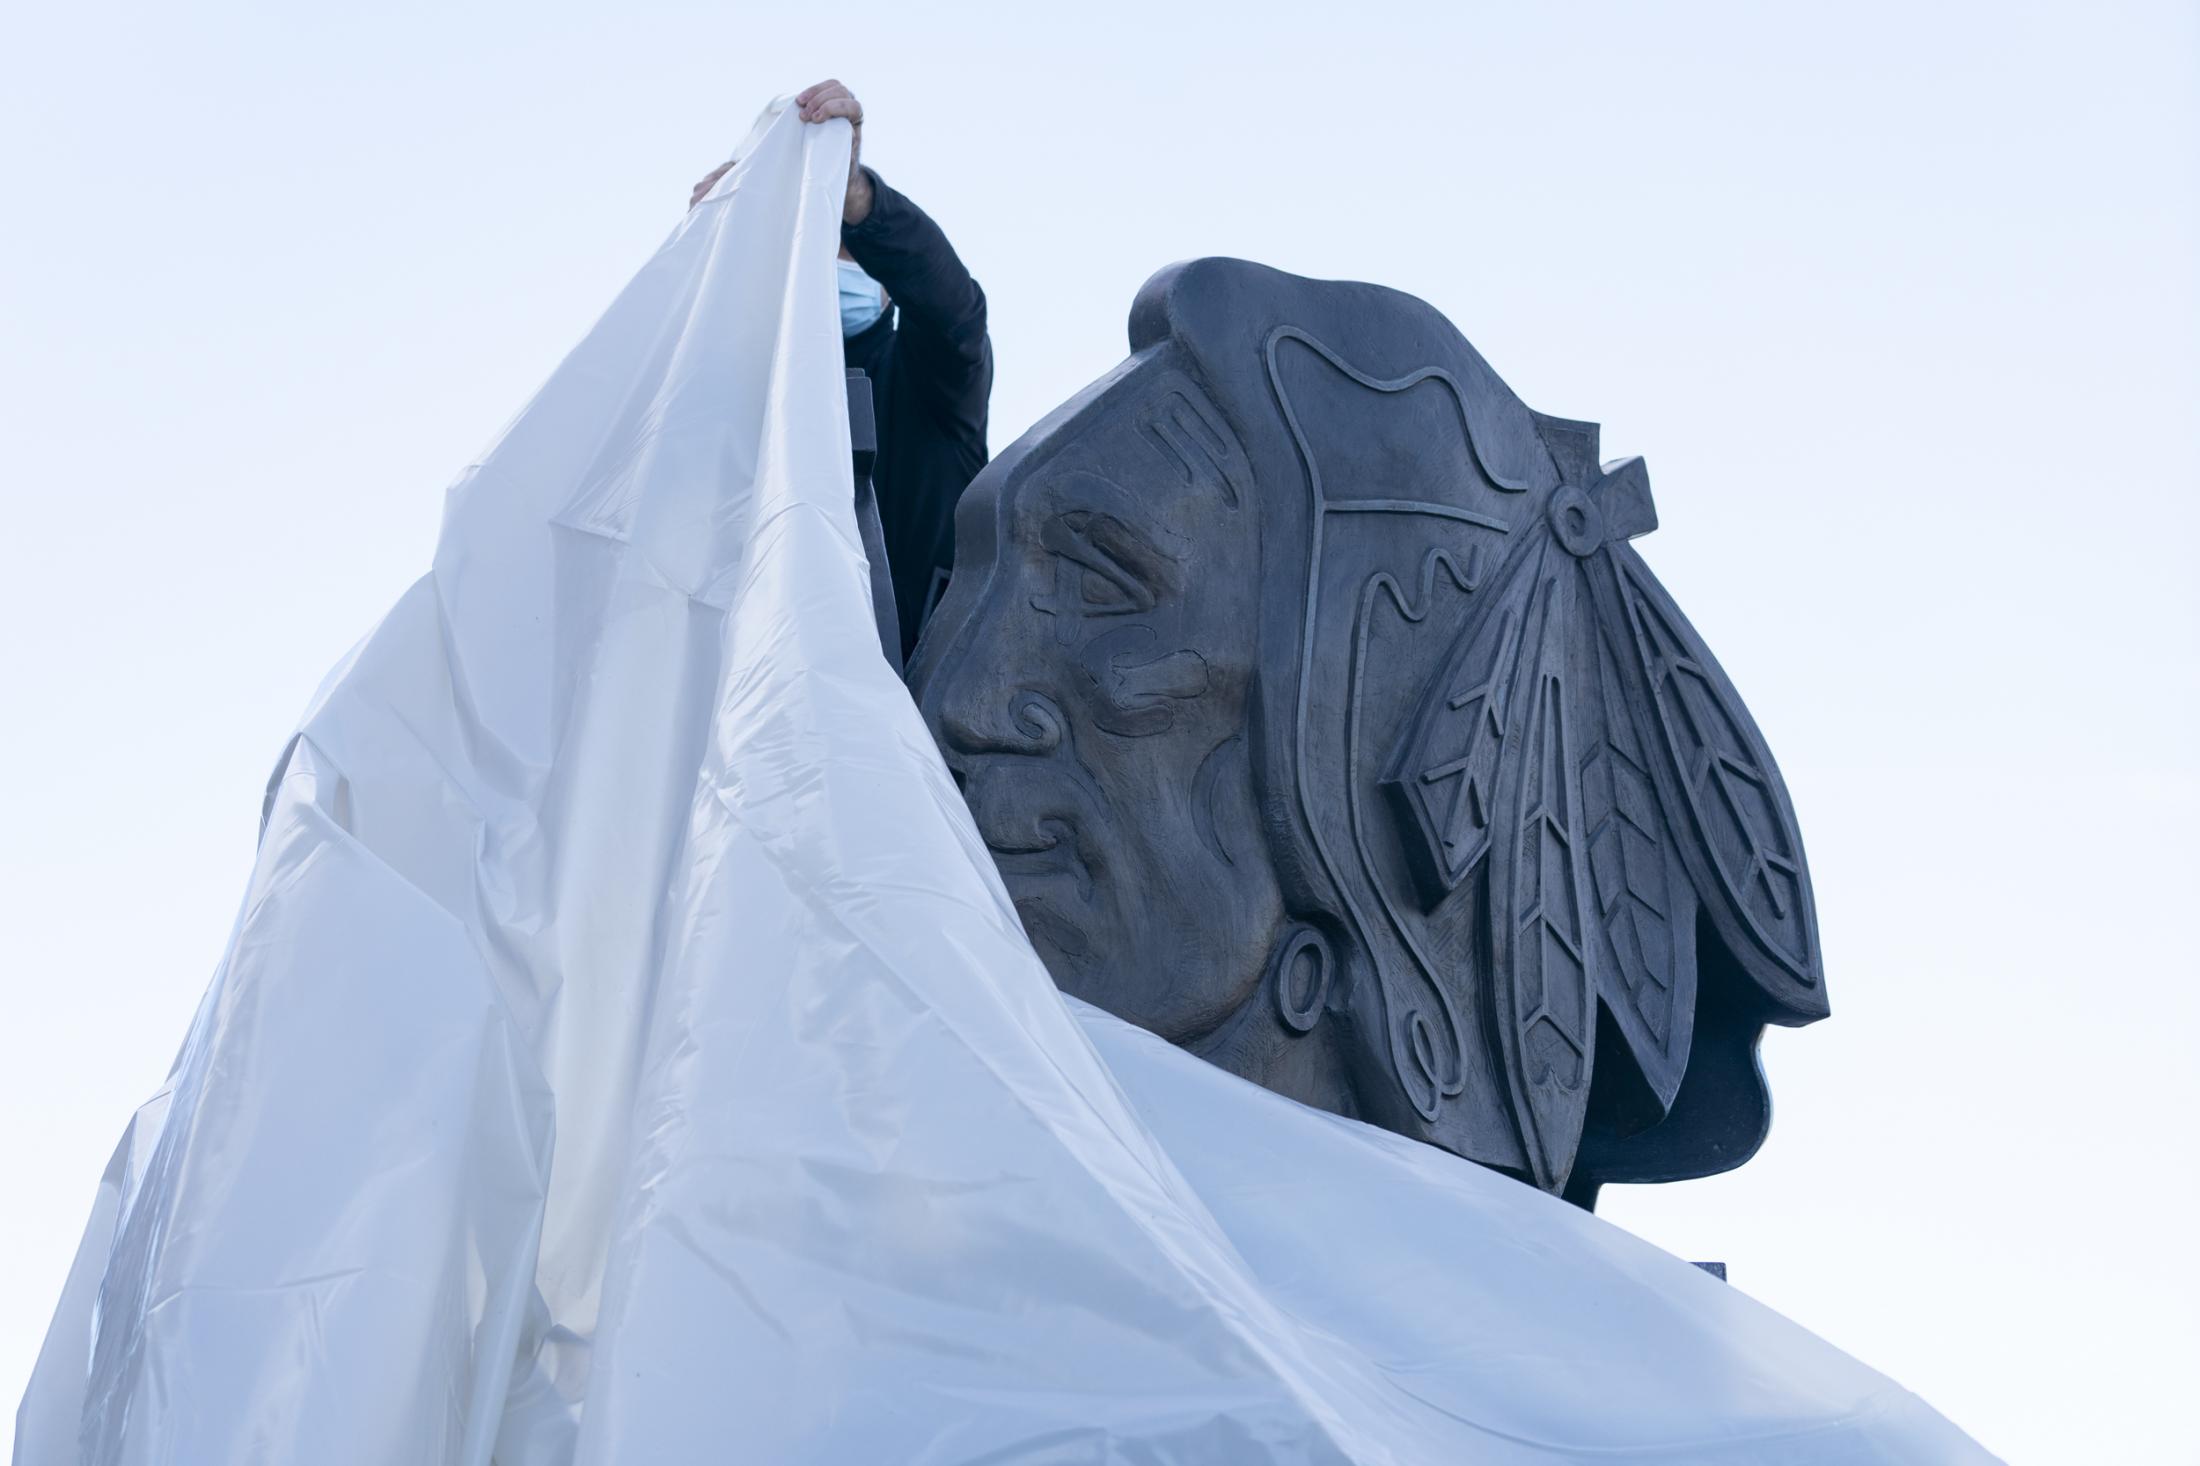 The New Reality - A crew member covers up the Blackhawks logo statue...